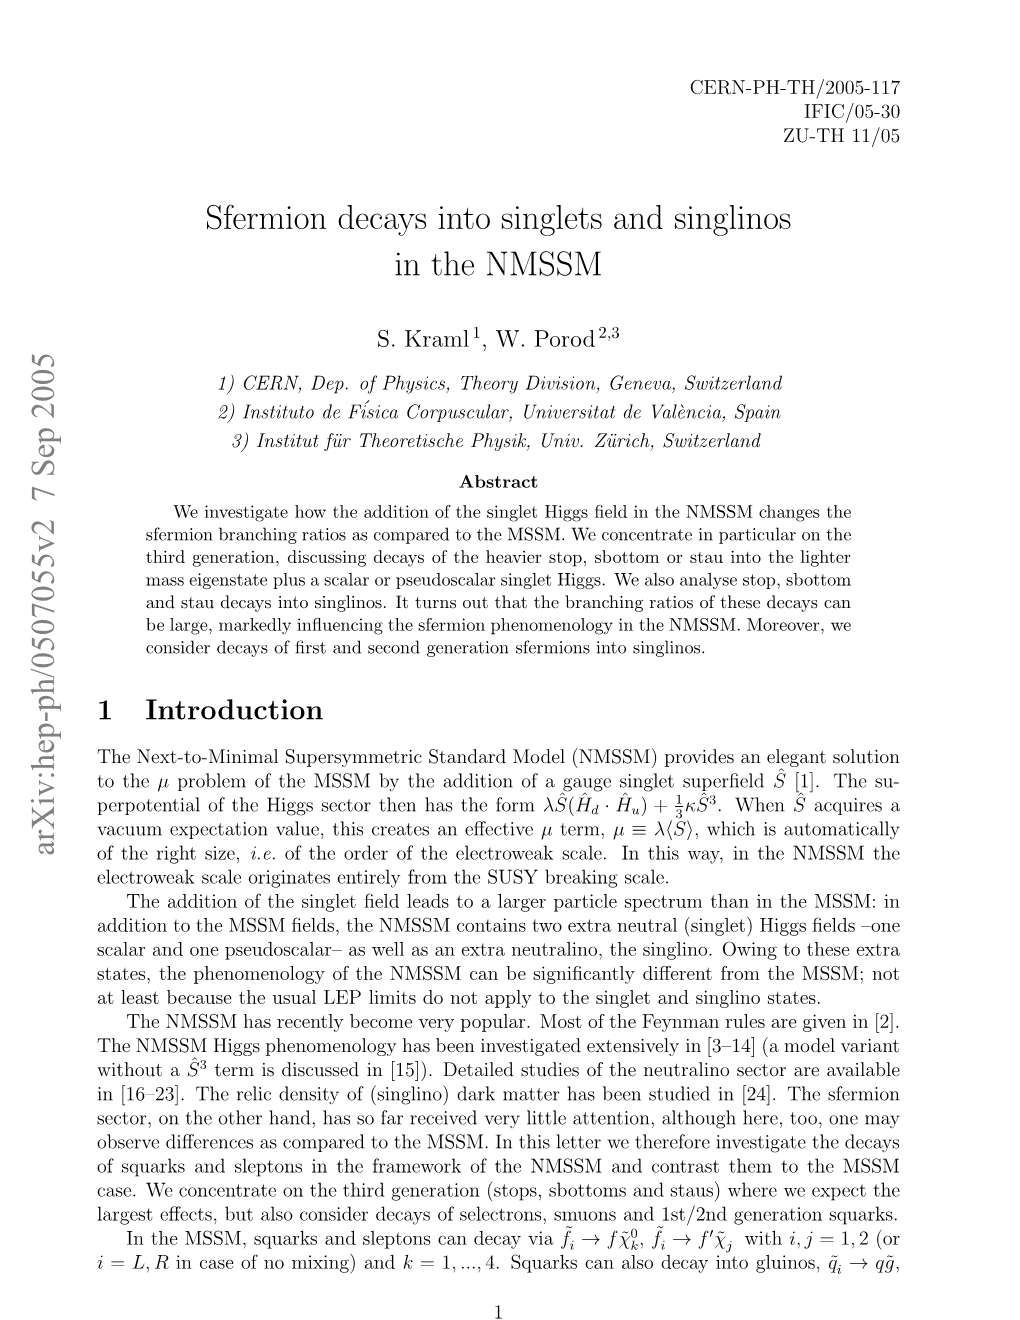 Sfermion Decays Into Singlets and Singlinos in the NMSSM